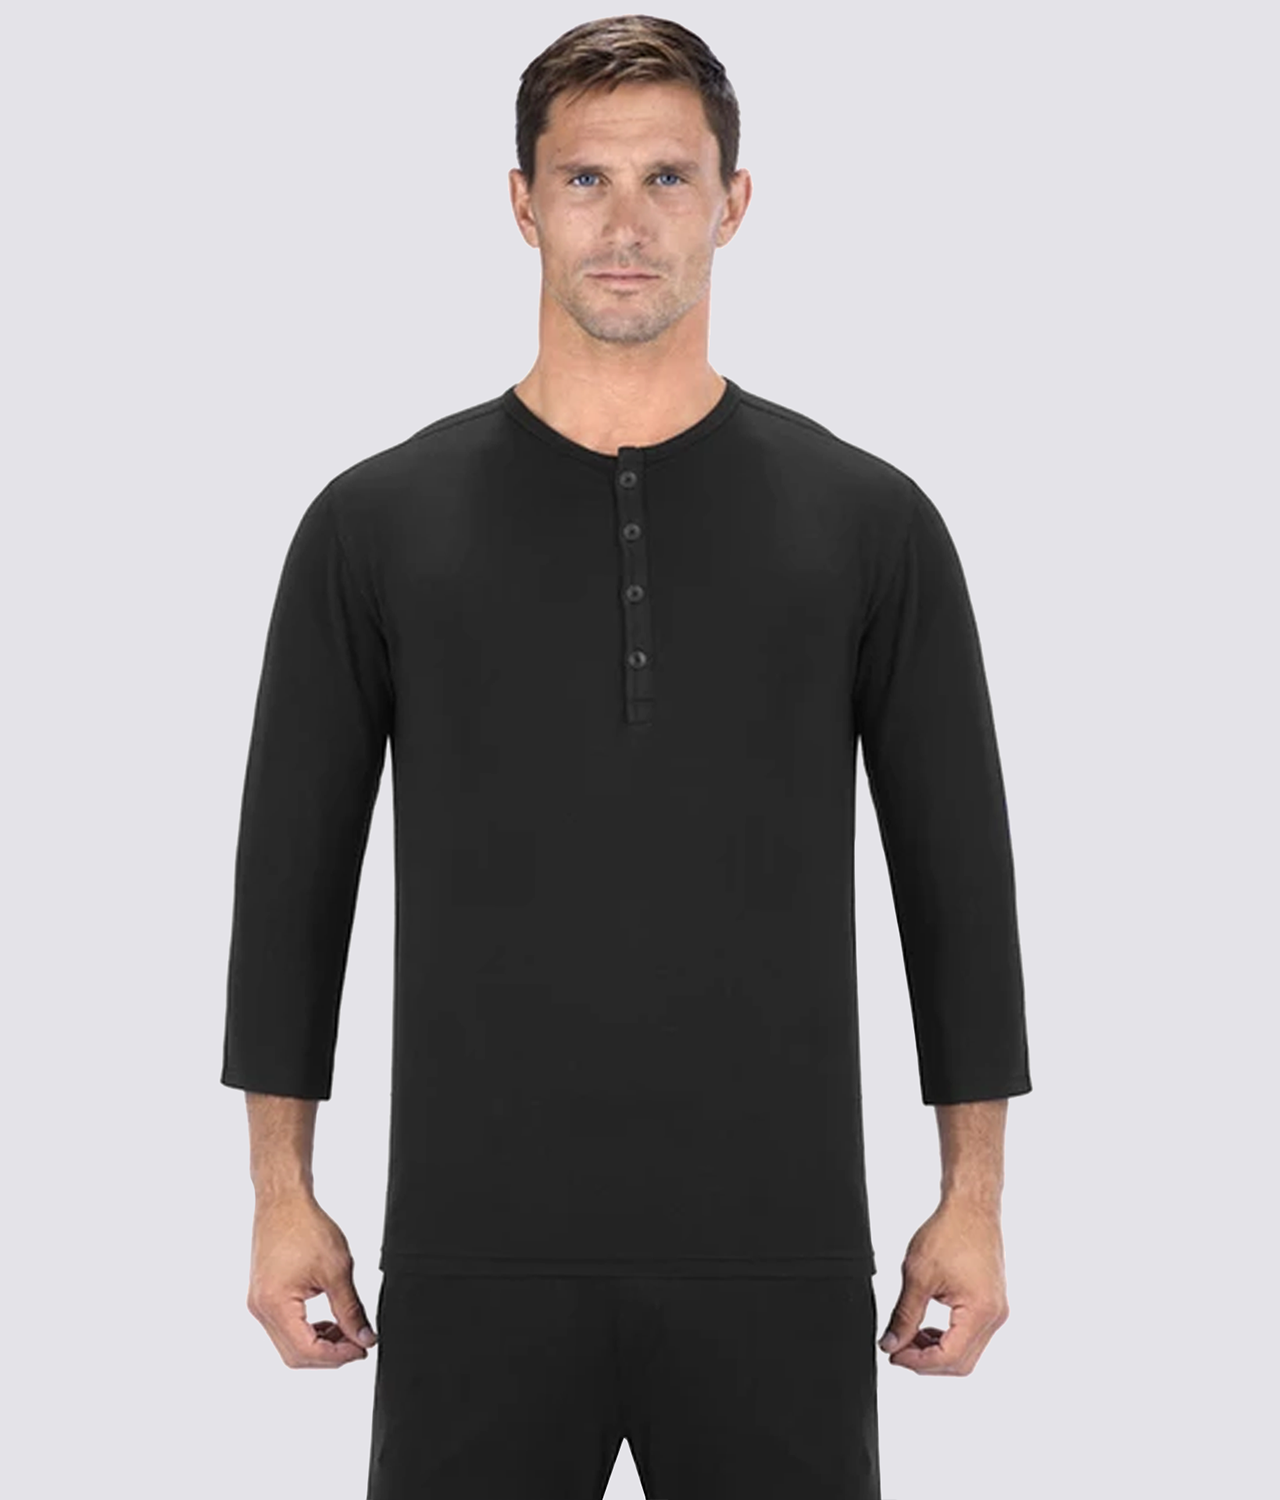 Elite Sports Adults' Black Athletic Recovery Wear